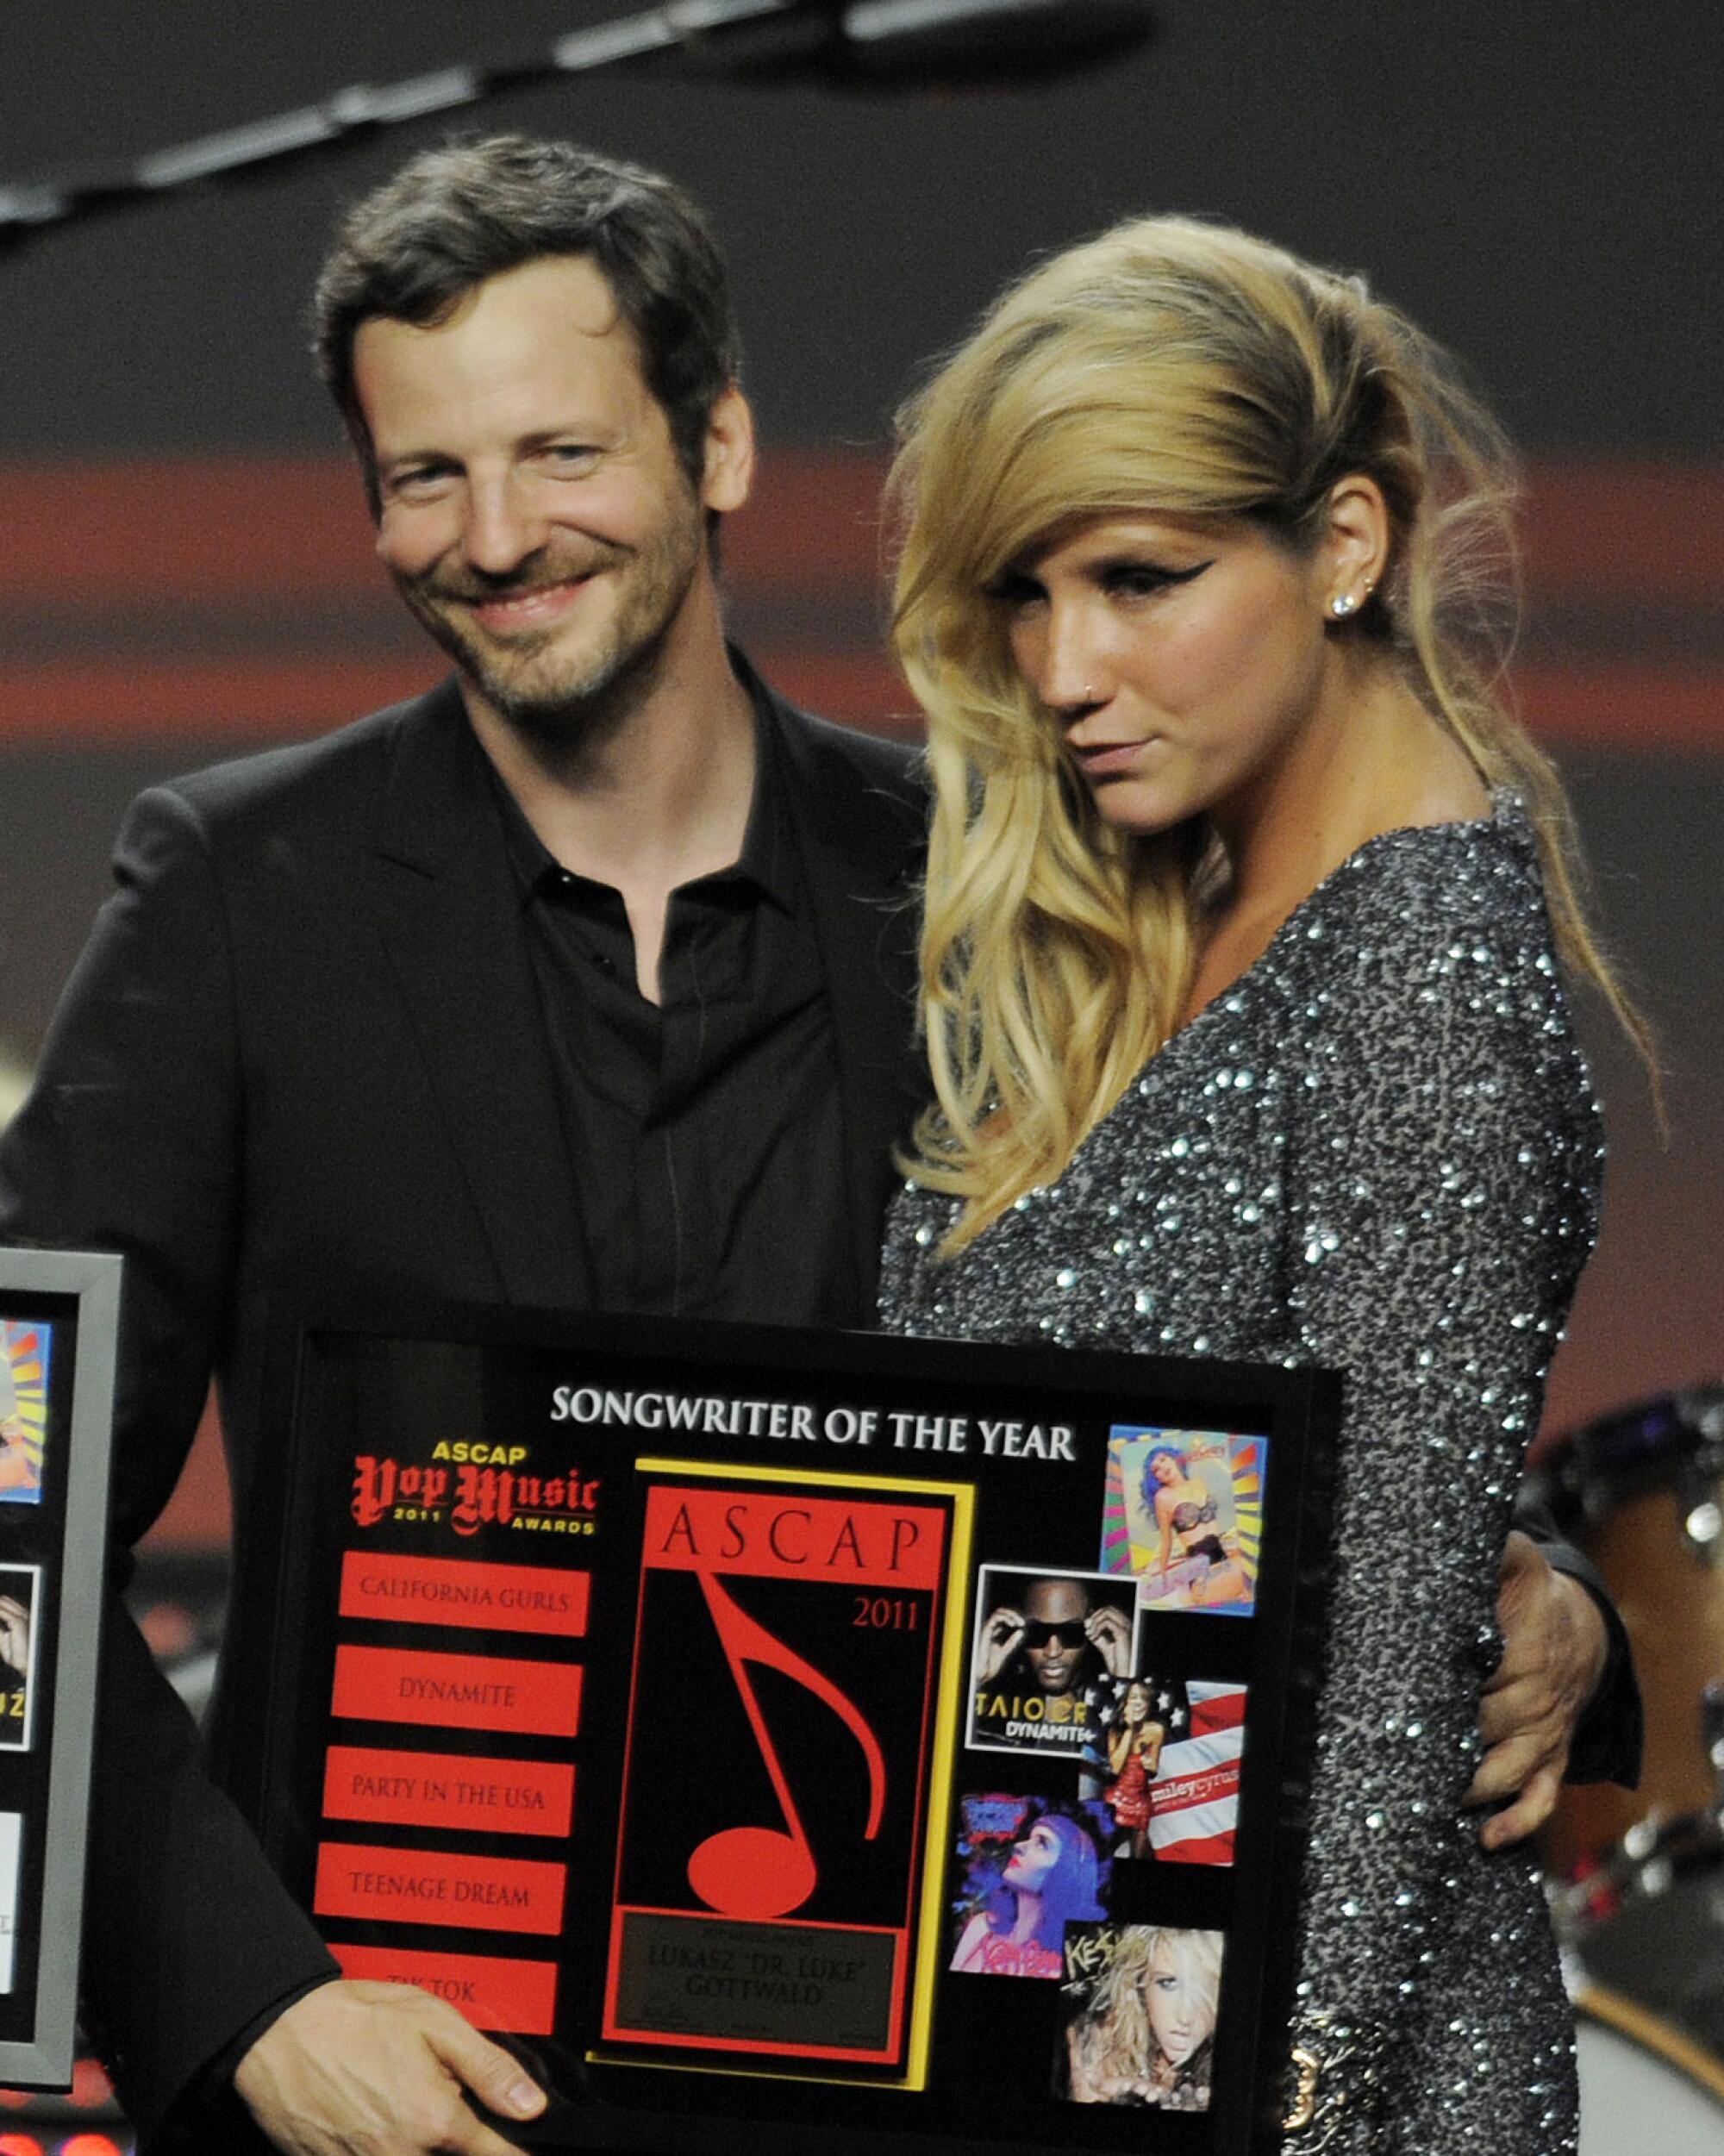 Lukasz "Dr. Luke" Gottwald poses with singer Kesha at the 28th Annual ASCAP Pop Music Awards in Los Angeles in 2011.